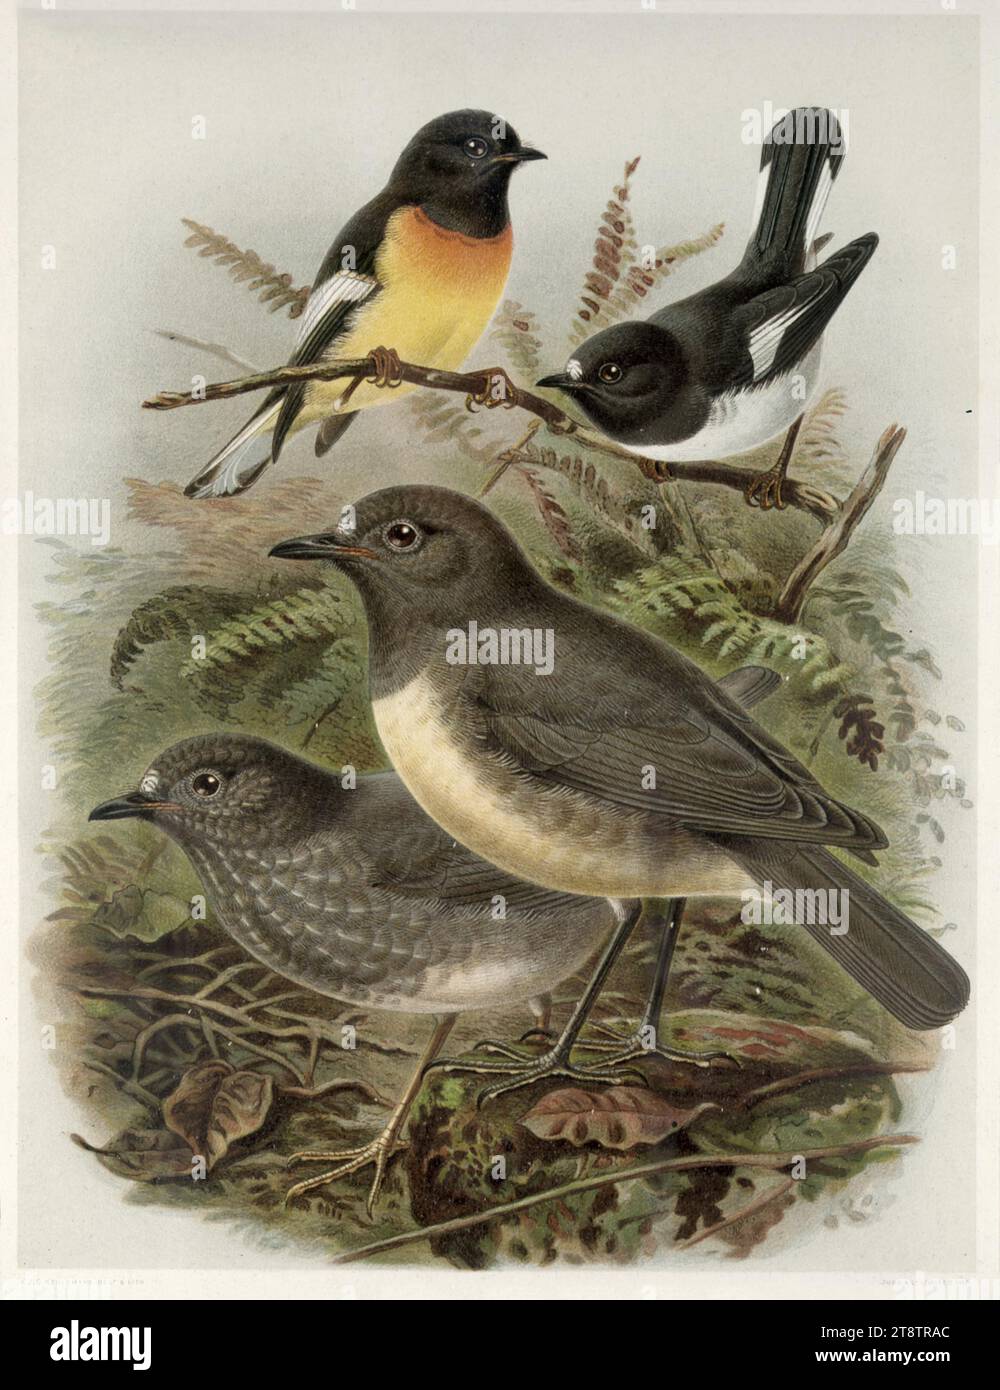 Keulemans, John Gerrard, 1842-1912: South Island tomtit, myiomoira macrocephala. North Island tomtit, myiomoira toitoi. North Island robin, miro australia. South Island robin, miro albifrons. / J. G. Keulemans delt. & lith. Judd & Co. Plate V. 1888, Shows tomtits in foreground and robins on a branch above, in a bush setting Stock Photo